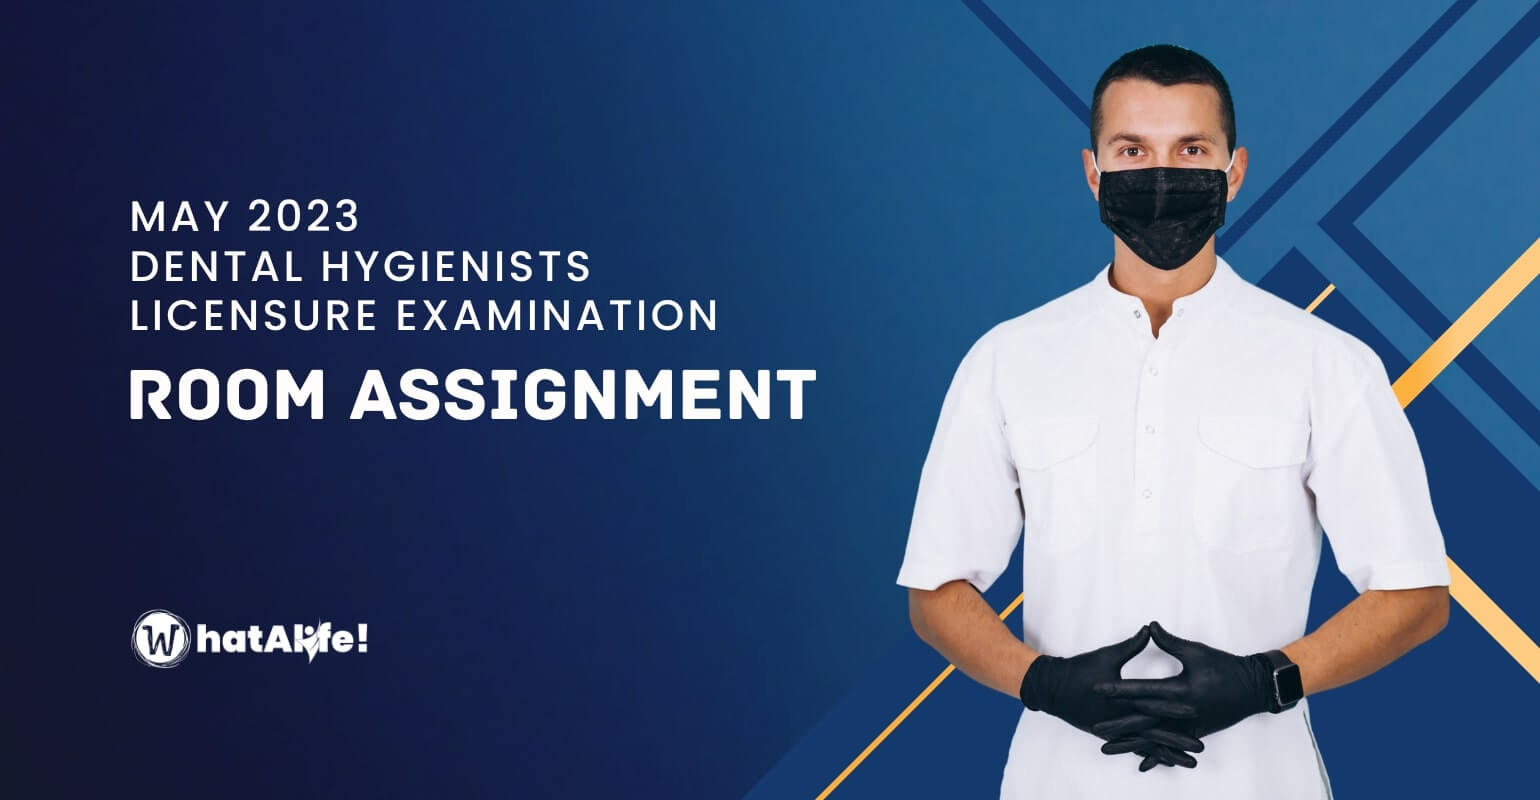 Room Assignment —  May 2023 Dental Hygienist Licensure Exam